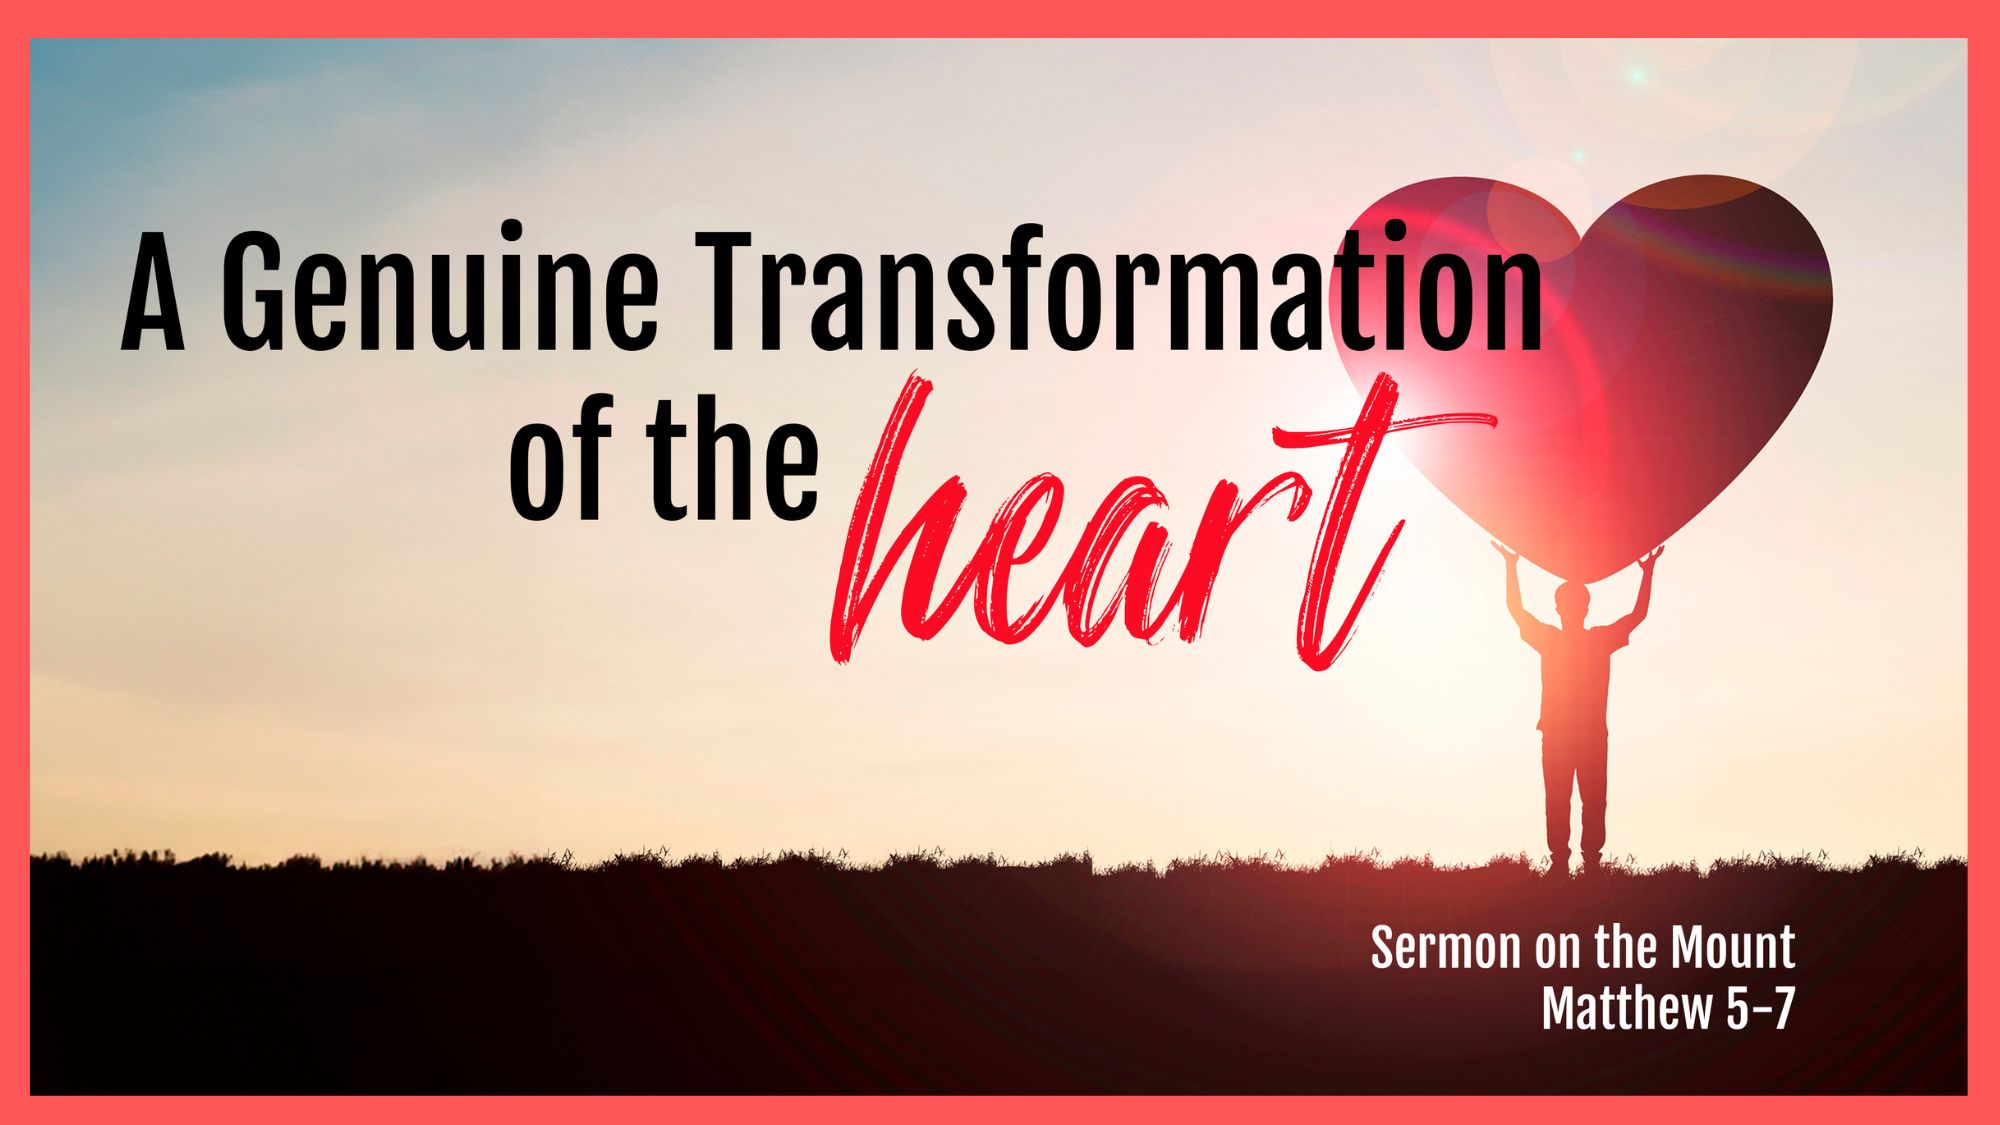 A Genuine Transformation of the Heart (Sermon on the Mount ) Lesson 1 Introduction to Matthew 5-7